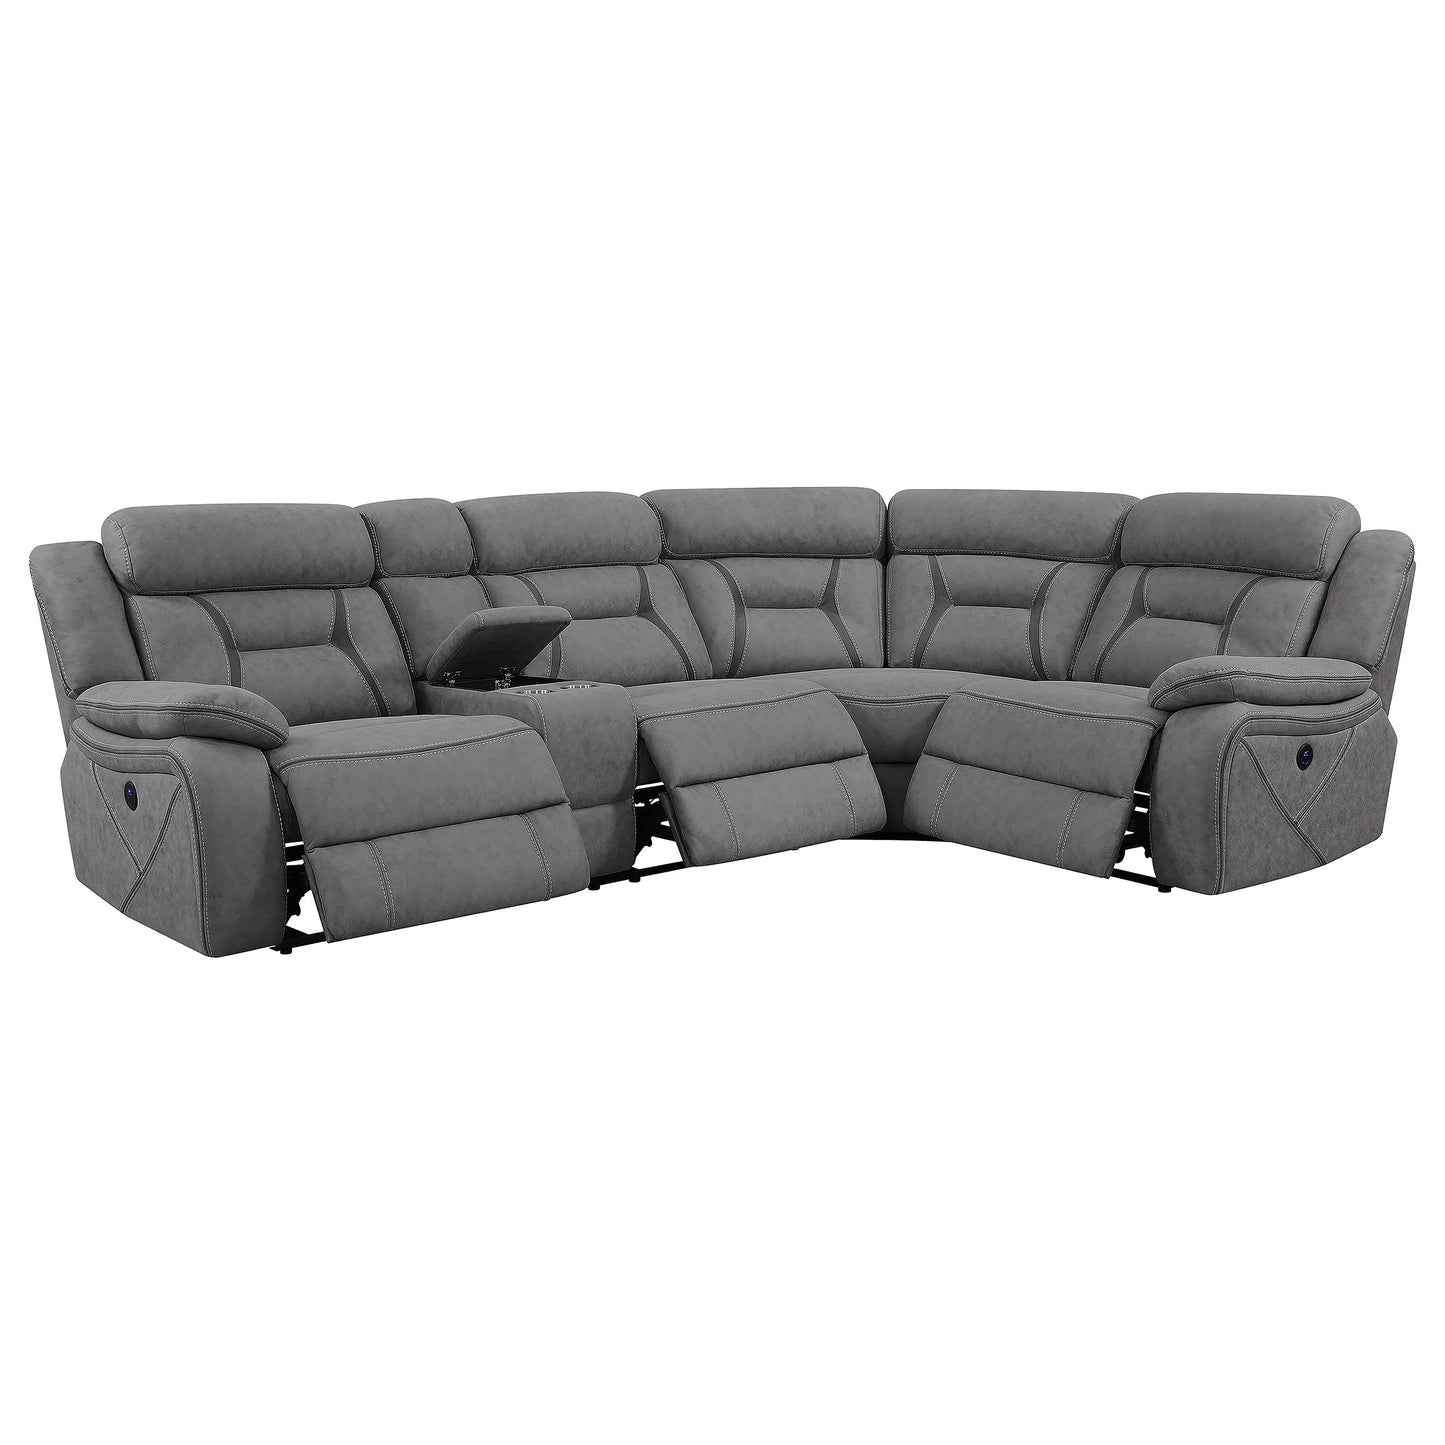 Higgins 4-piece Upholstered Power Sectional Grey